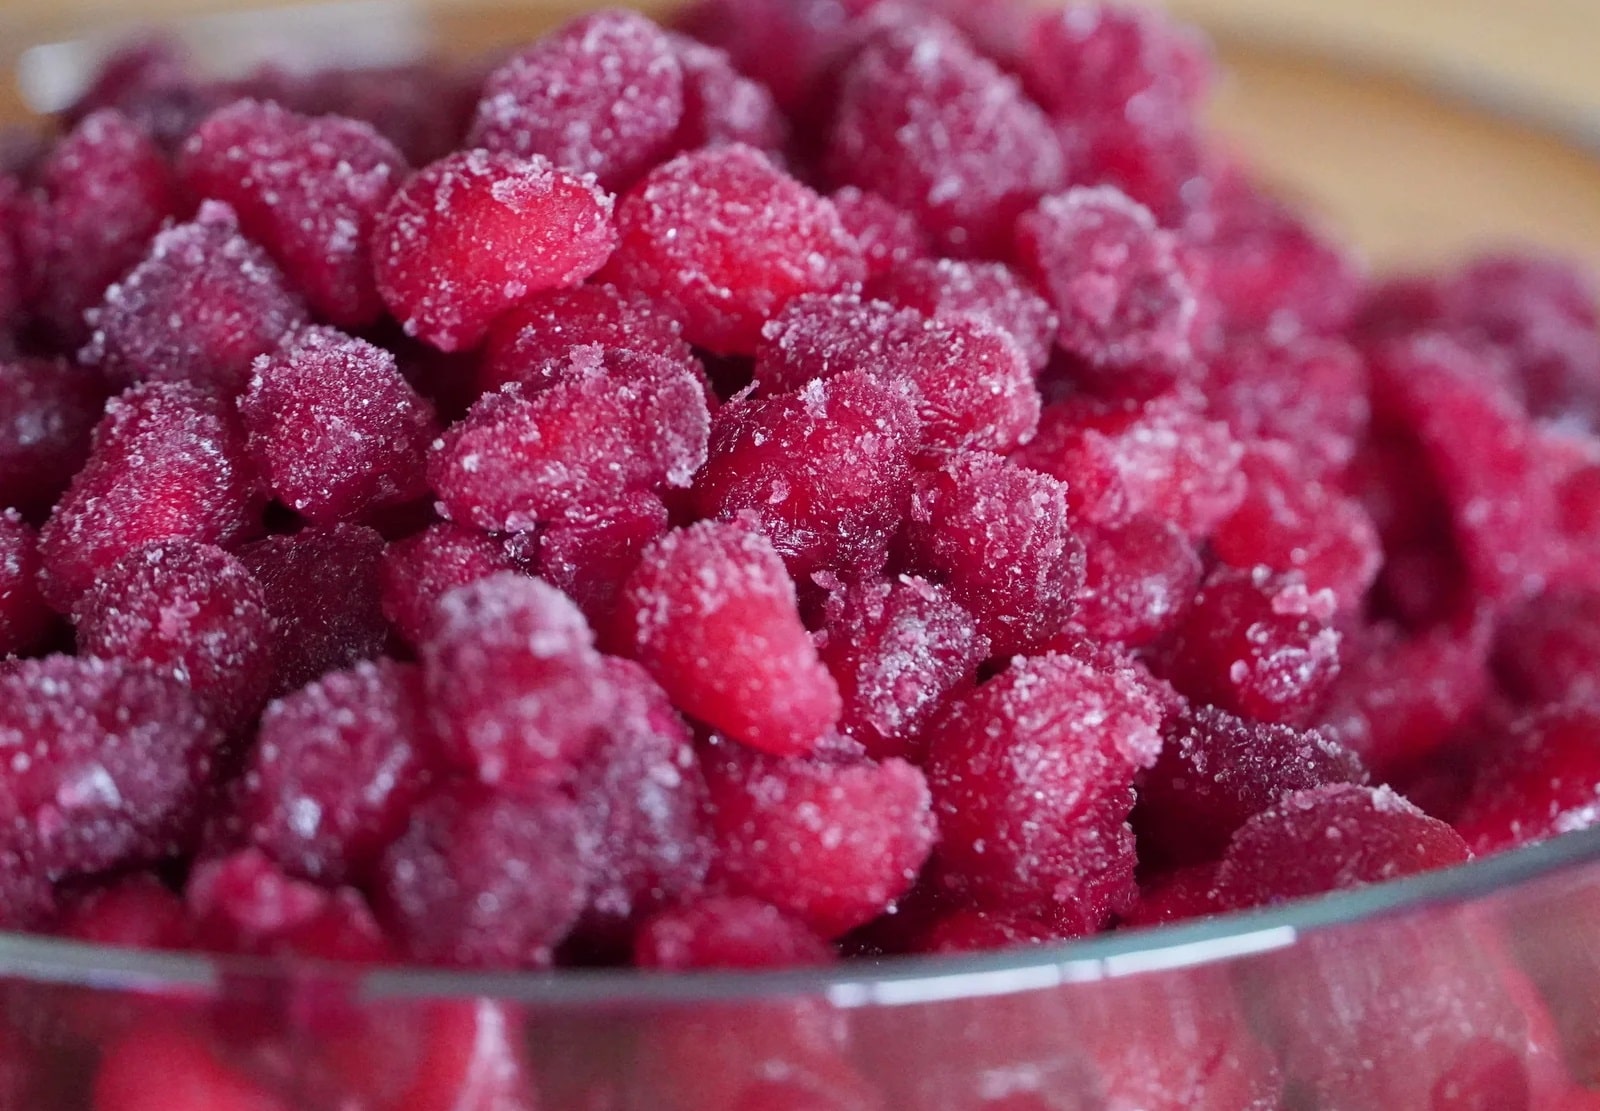 How To Use Frozen Pomegranate Seeds